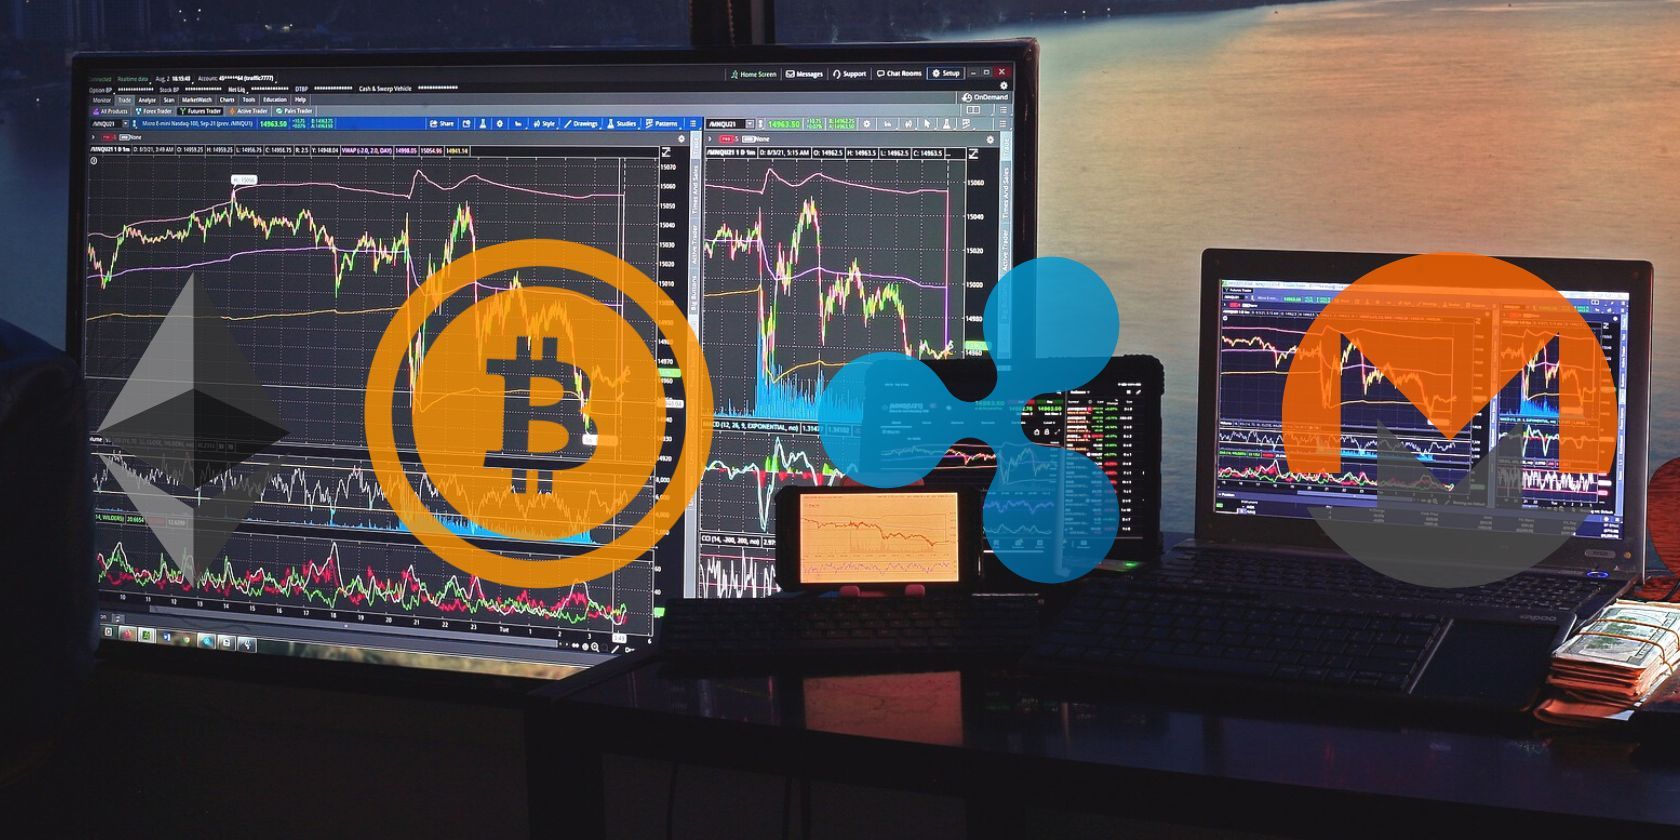 Ethereum, Bitcoin, Ripple, Monero logos seen over a photo showing trading graphs on computers